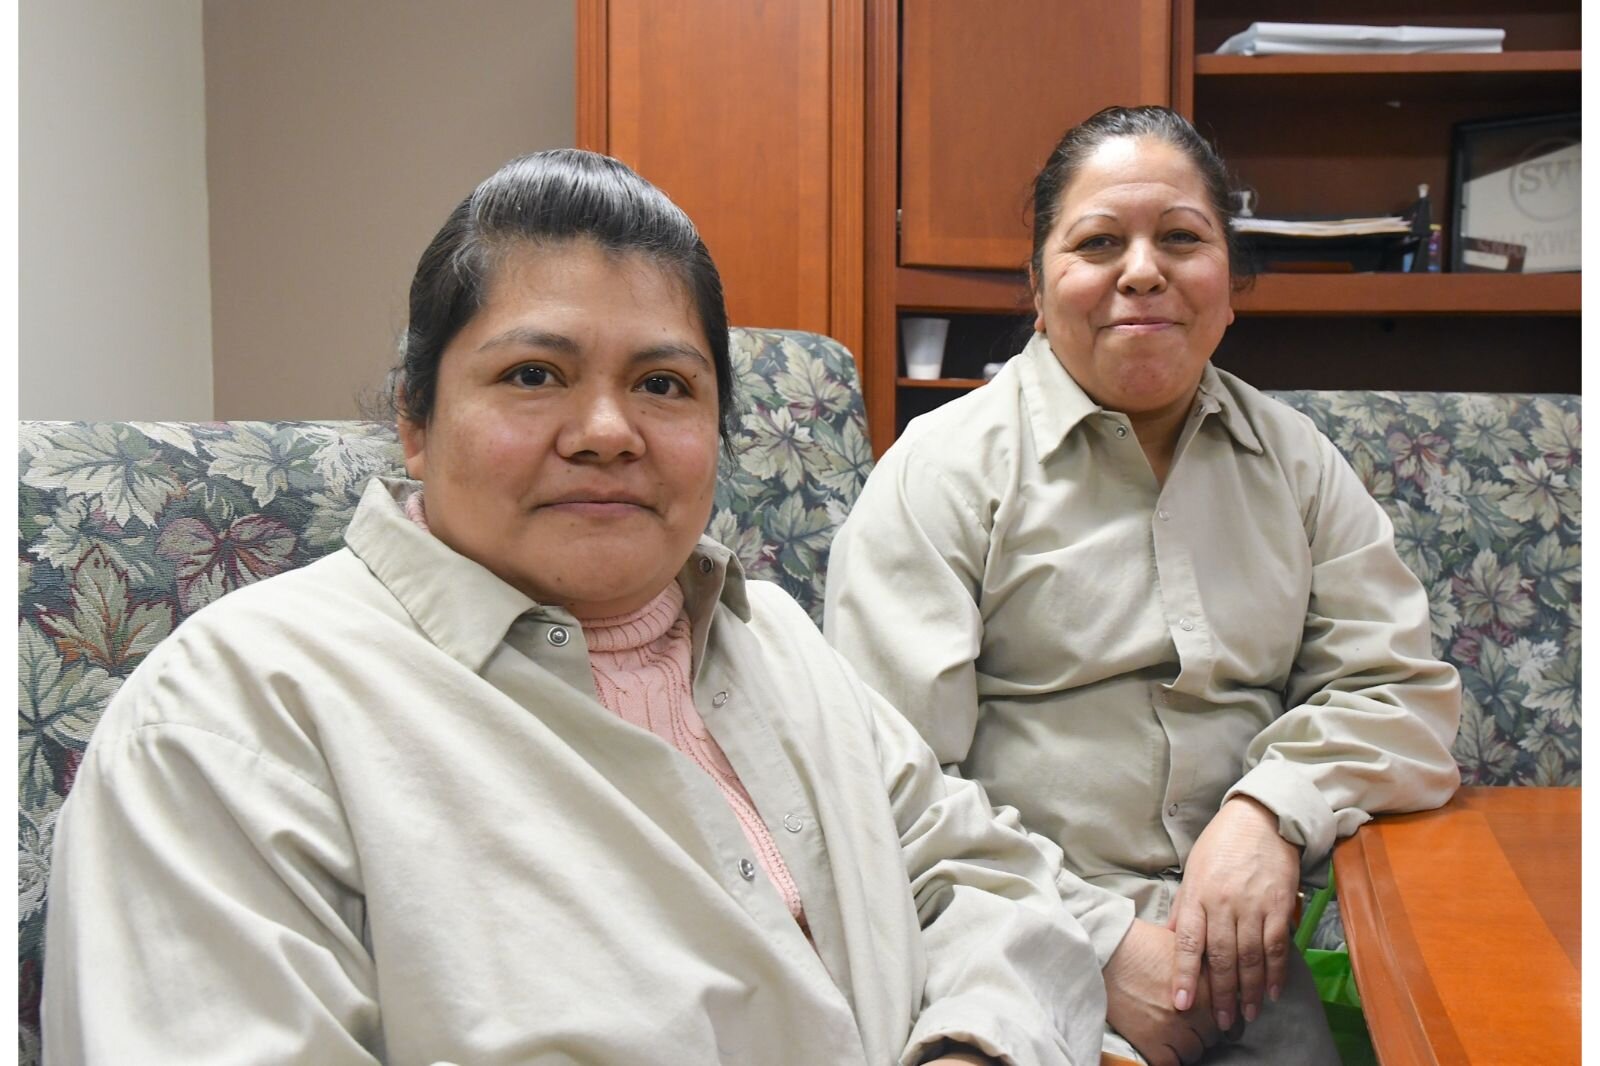 Elizabeth Delgado Galeno, left, and Araceli Raphael are two Snackwerks employees who completed the “Workforce English as a New Language (ENL)” course. The course was done in conjunction with VOCES and the support of the City of Battle Creek.